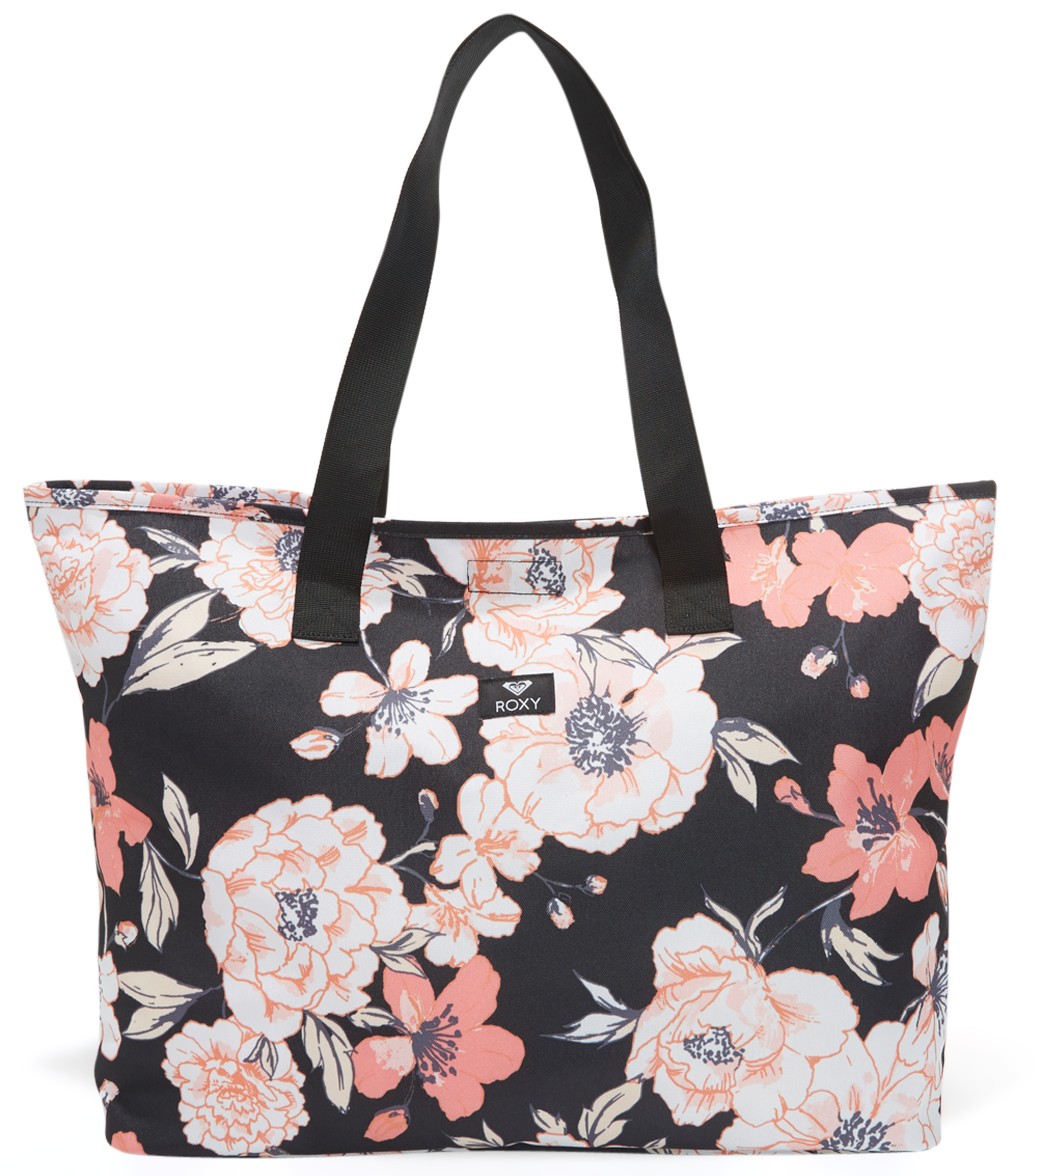 Roxy Wildflower Tote Bag at SwimOutlet.com